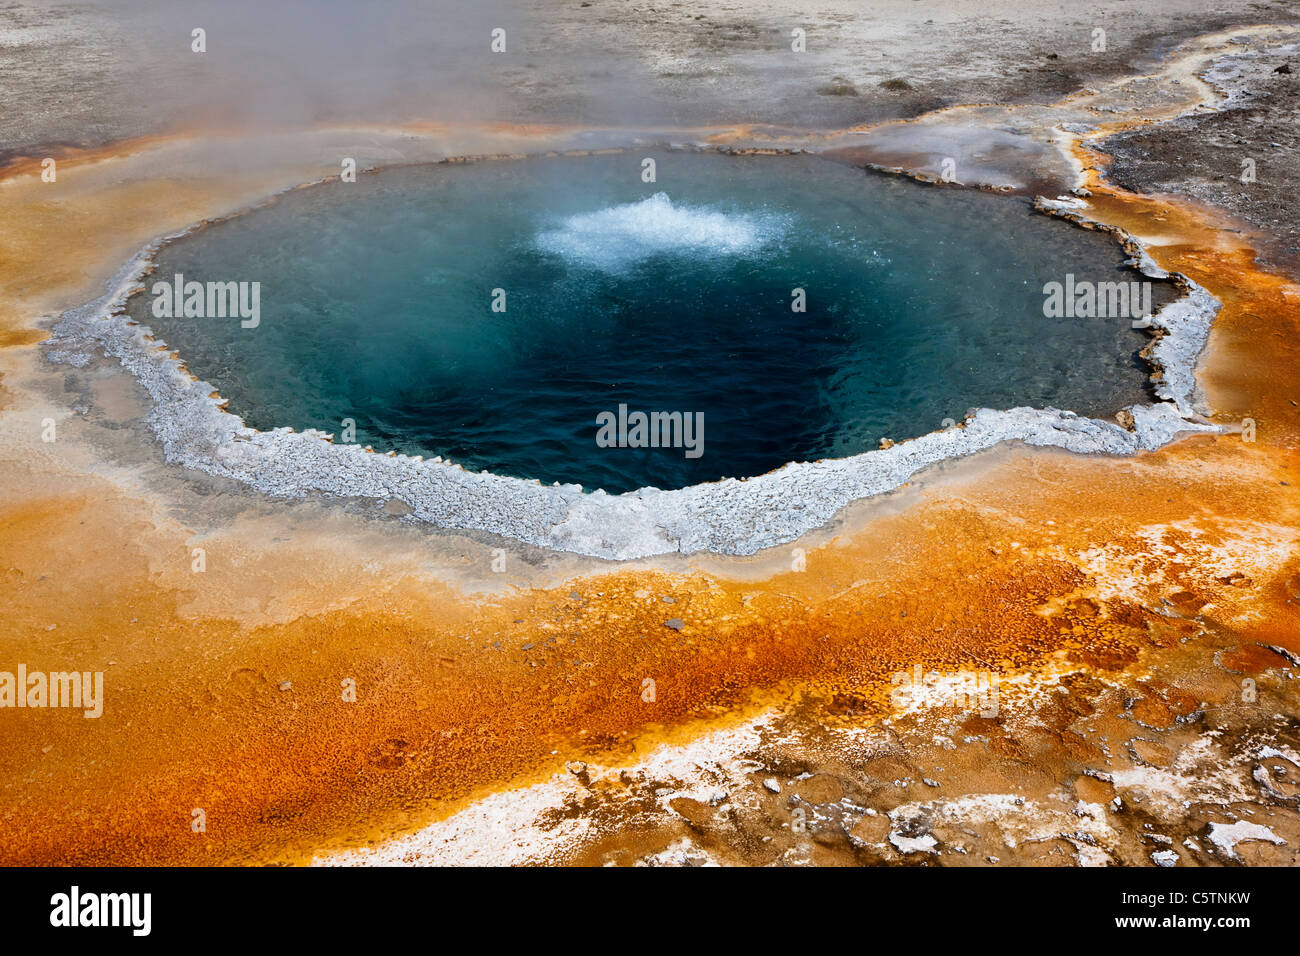 USA, Wyoming, Yellowstone Park, Piscine à crête Banque D'Images